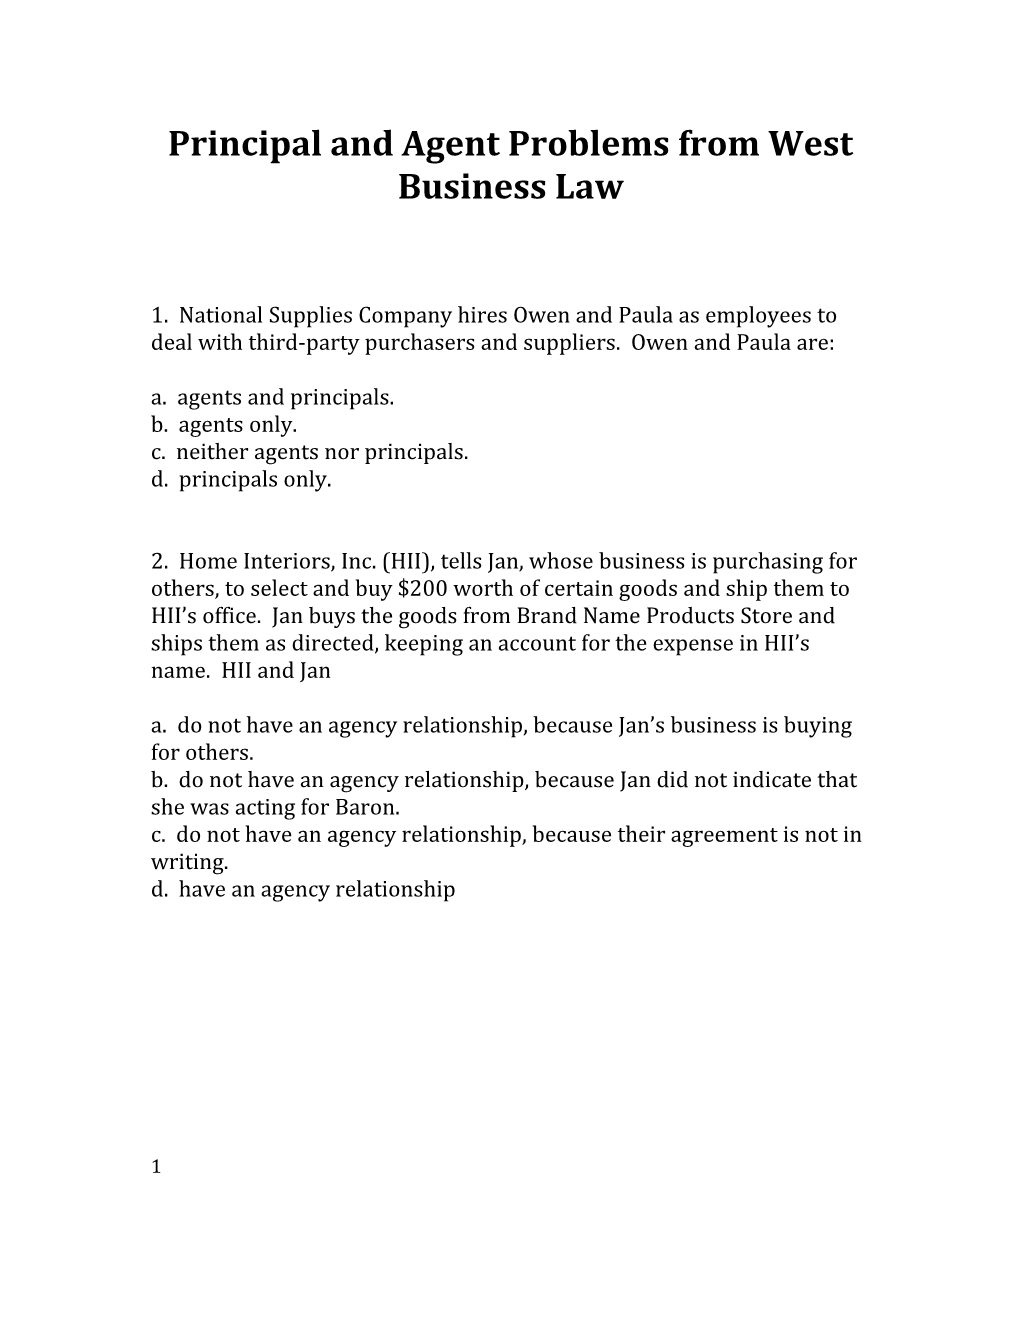 Principal and Agent Problems from West Business Law